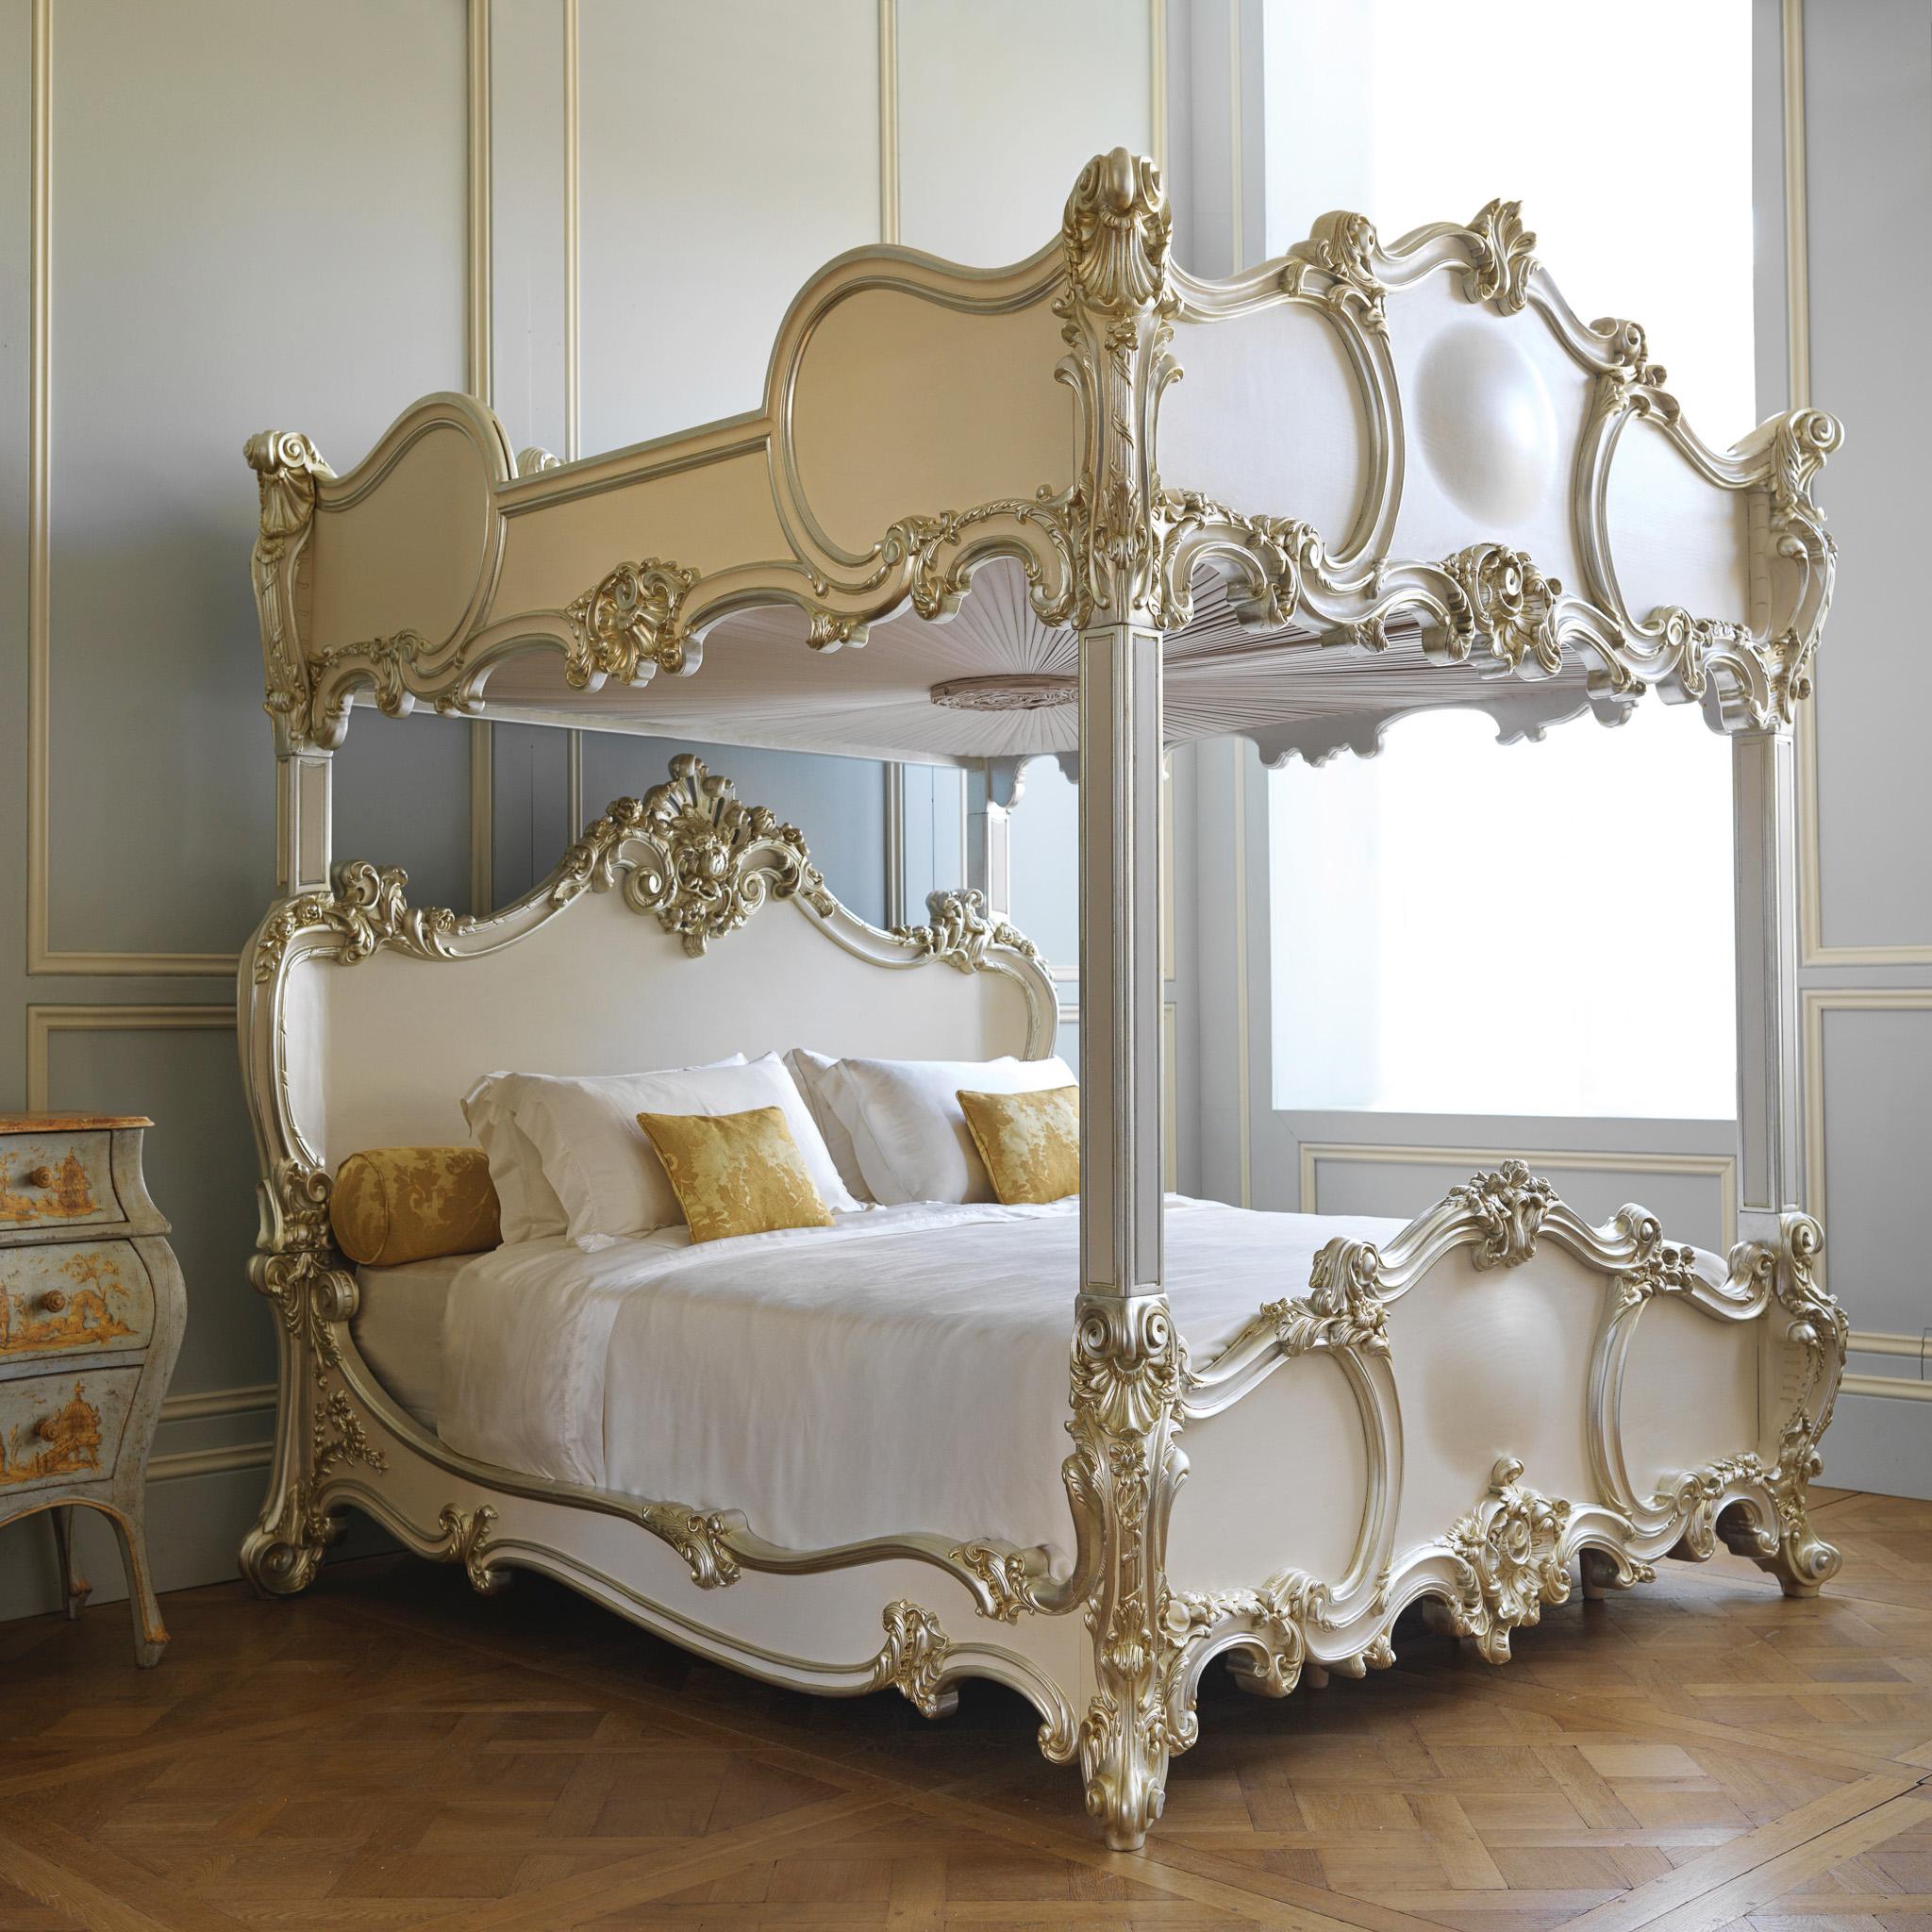 A Unique bed by La Maison London, masters of fine wood carving - A Rococo style Four Poster Bed which has a hidden top bed within its 2 tier design. The top section has been designed to look like a canopy so that the bed visually presents as a Four